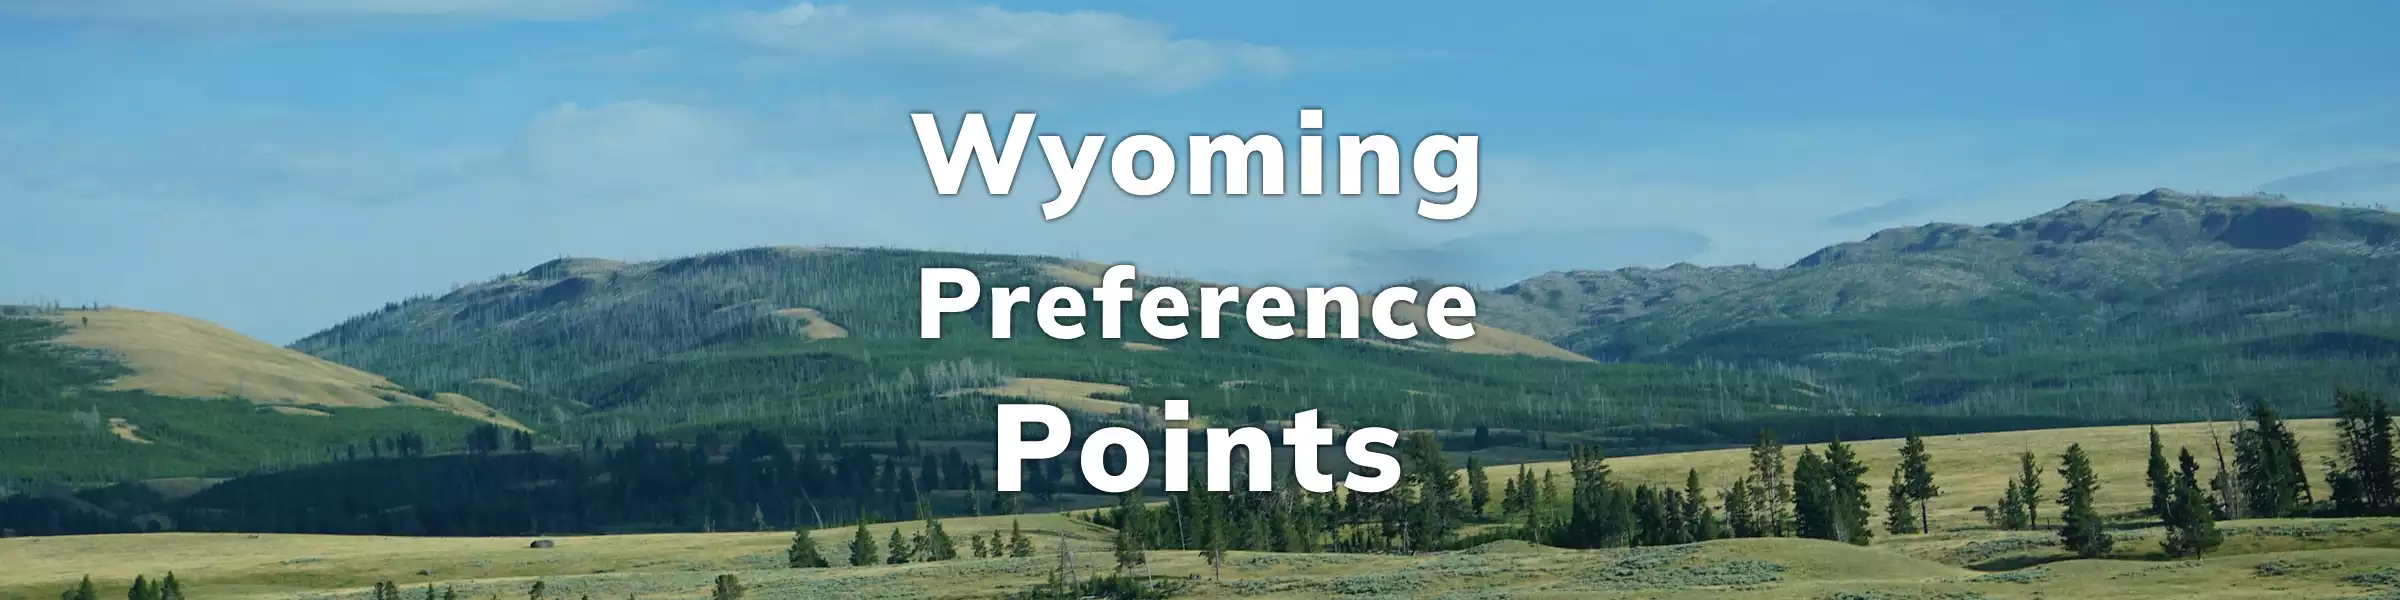 Wyoming Preference Point